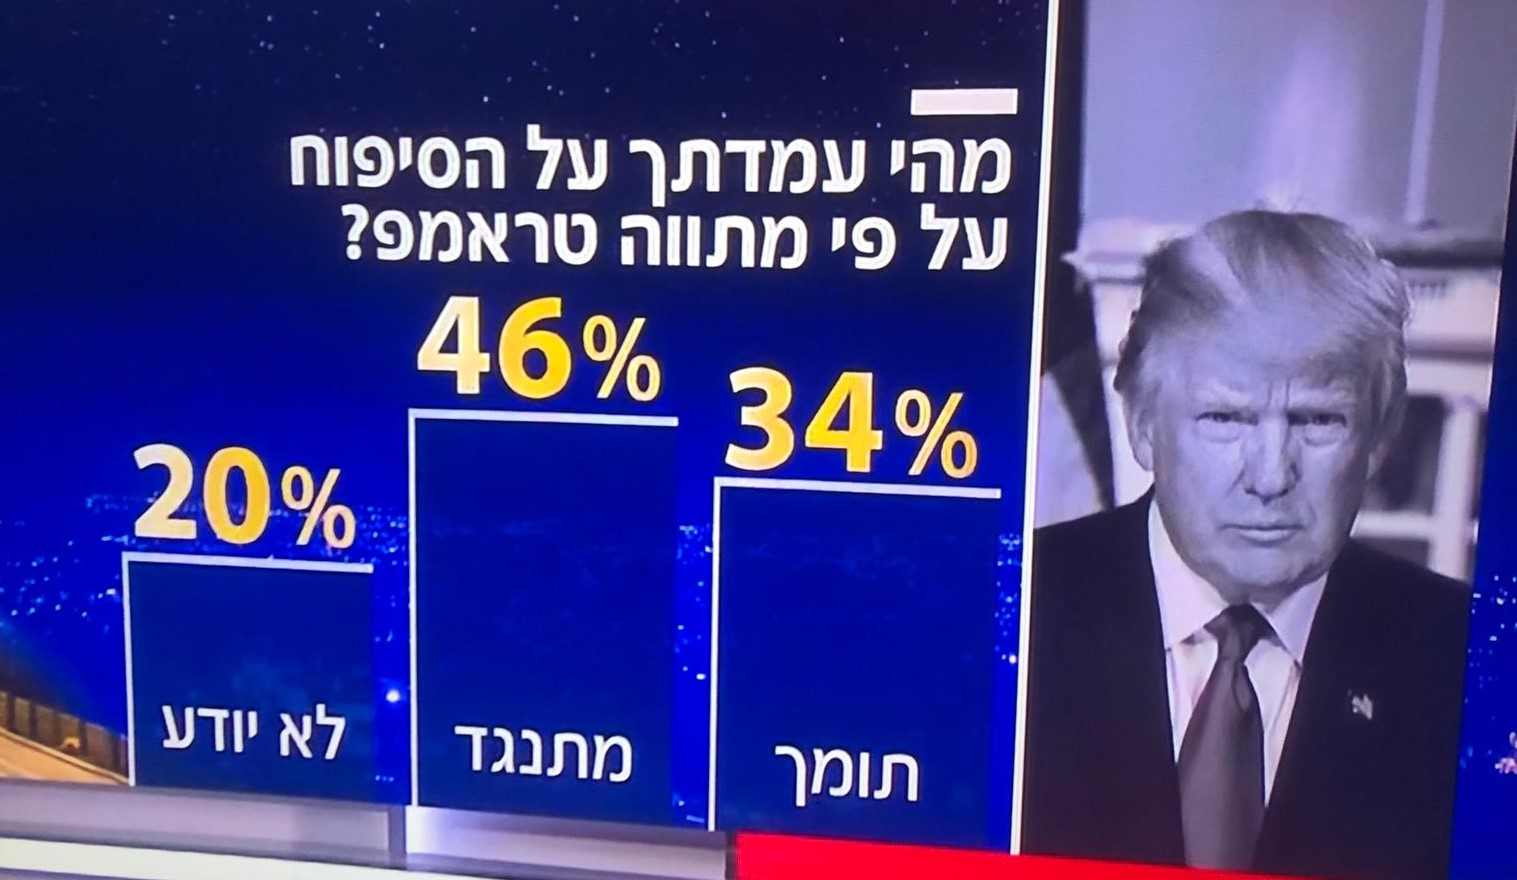 A clear plurality of citizens of Israel oppose Netanyahu's plan for annexation of territories in the West Bank, supported the Trump administration. The poll carried by Channel 12 News and broadcast last Monday, June 8 asked: What is you position on annexation along the lines of the Trump proposal?" 46% were against, 34% were in favor, and 20% did not know.